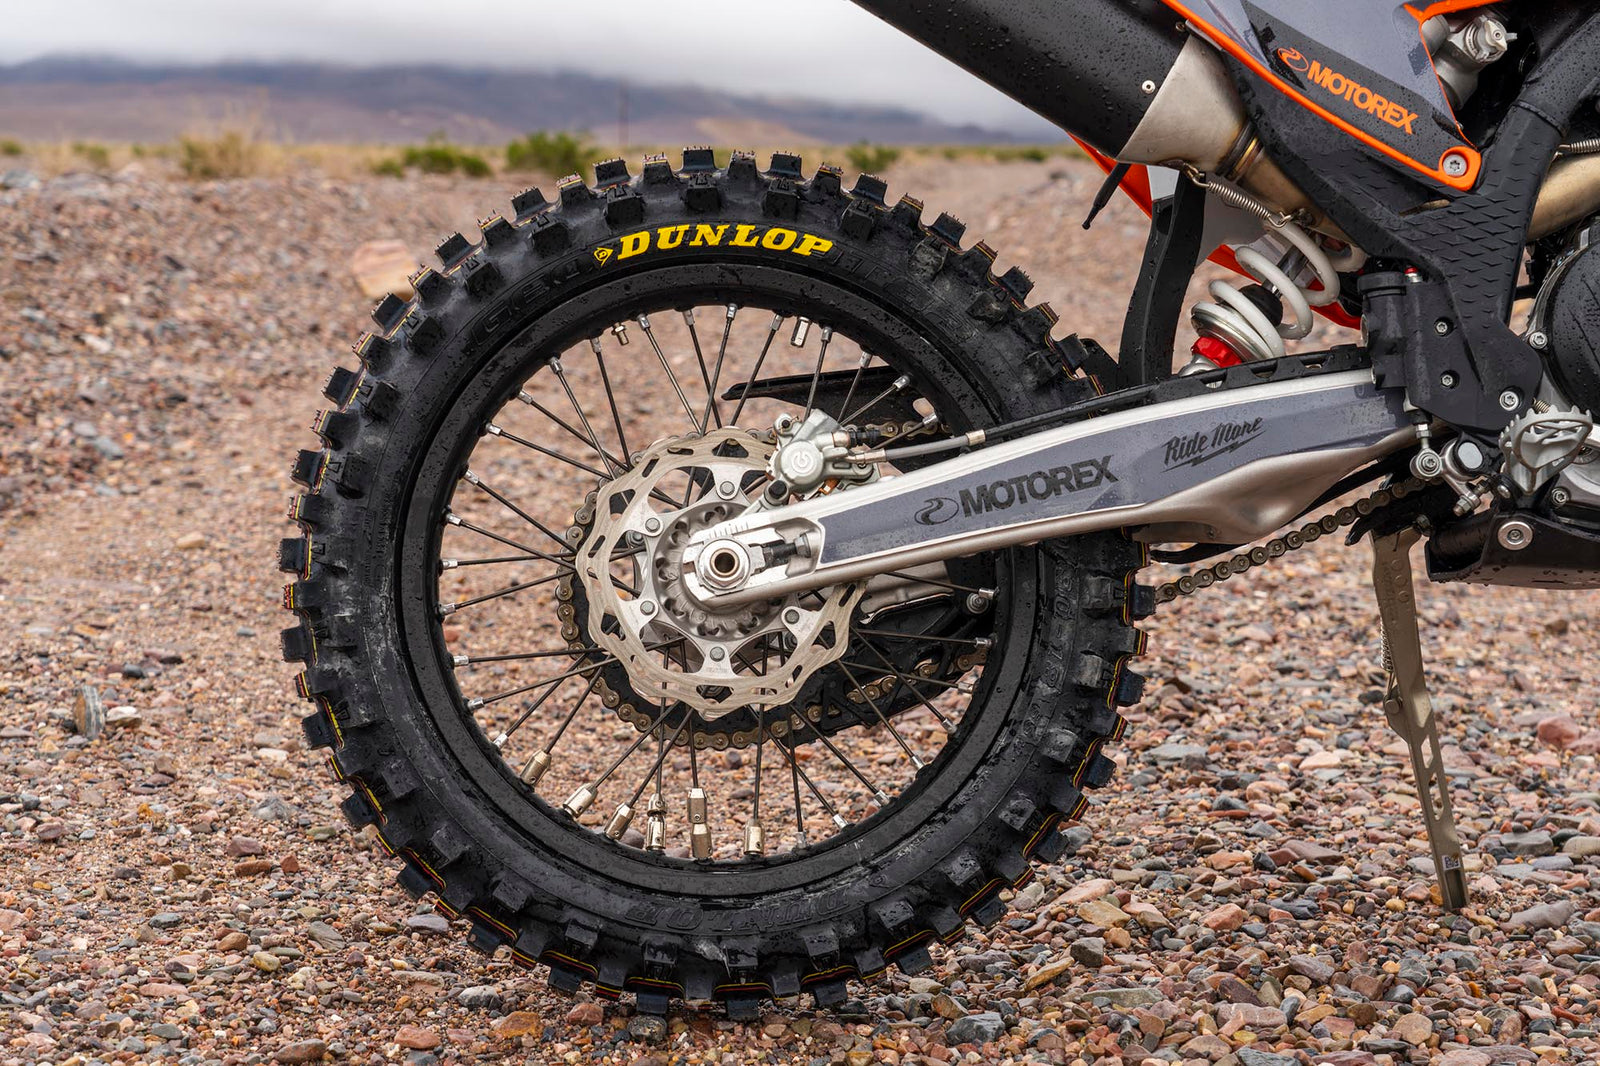 Tested: Dunlop Motorcycle Tires Geomax AT82